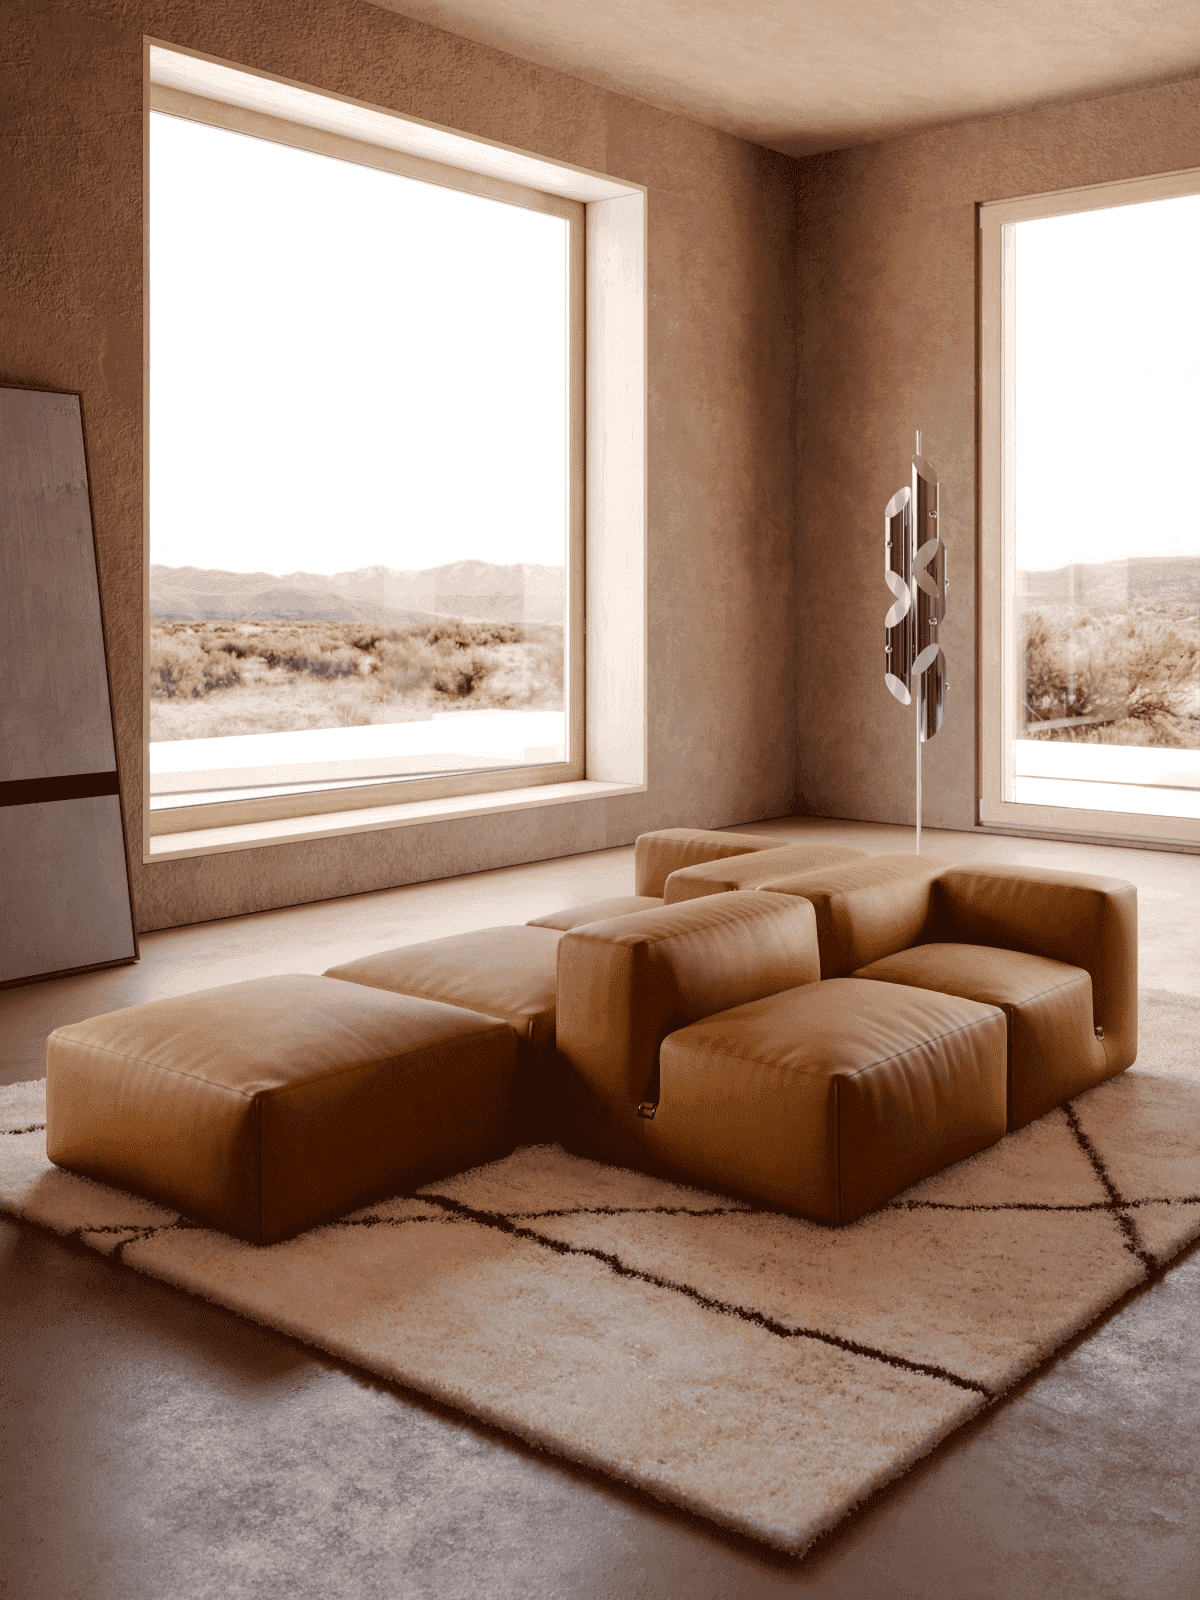 designer living room with modern brown leather sofa